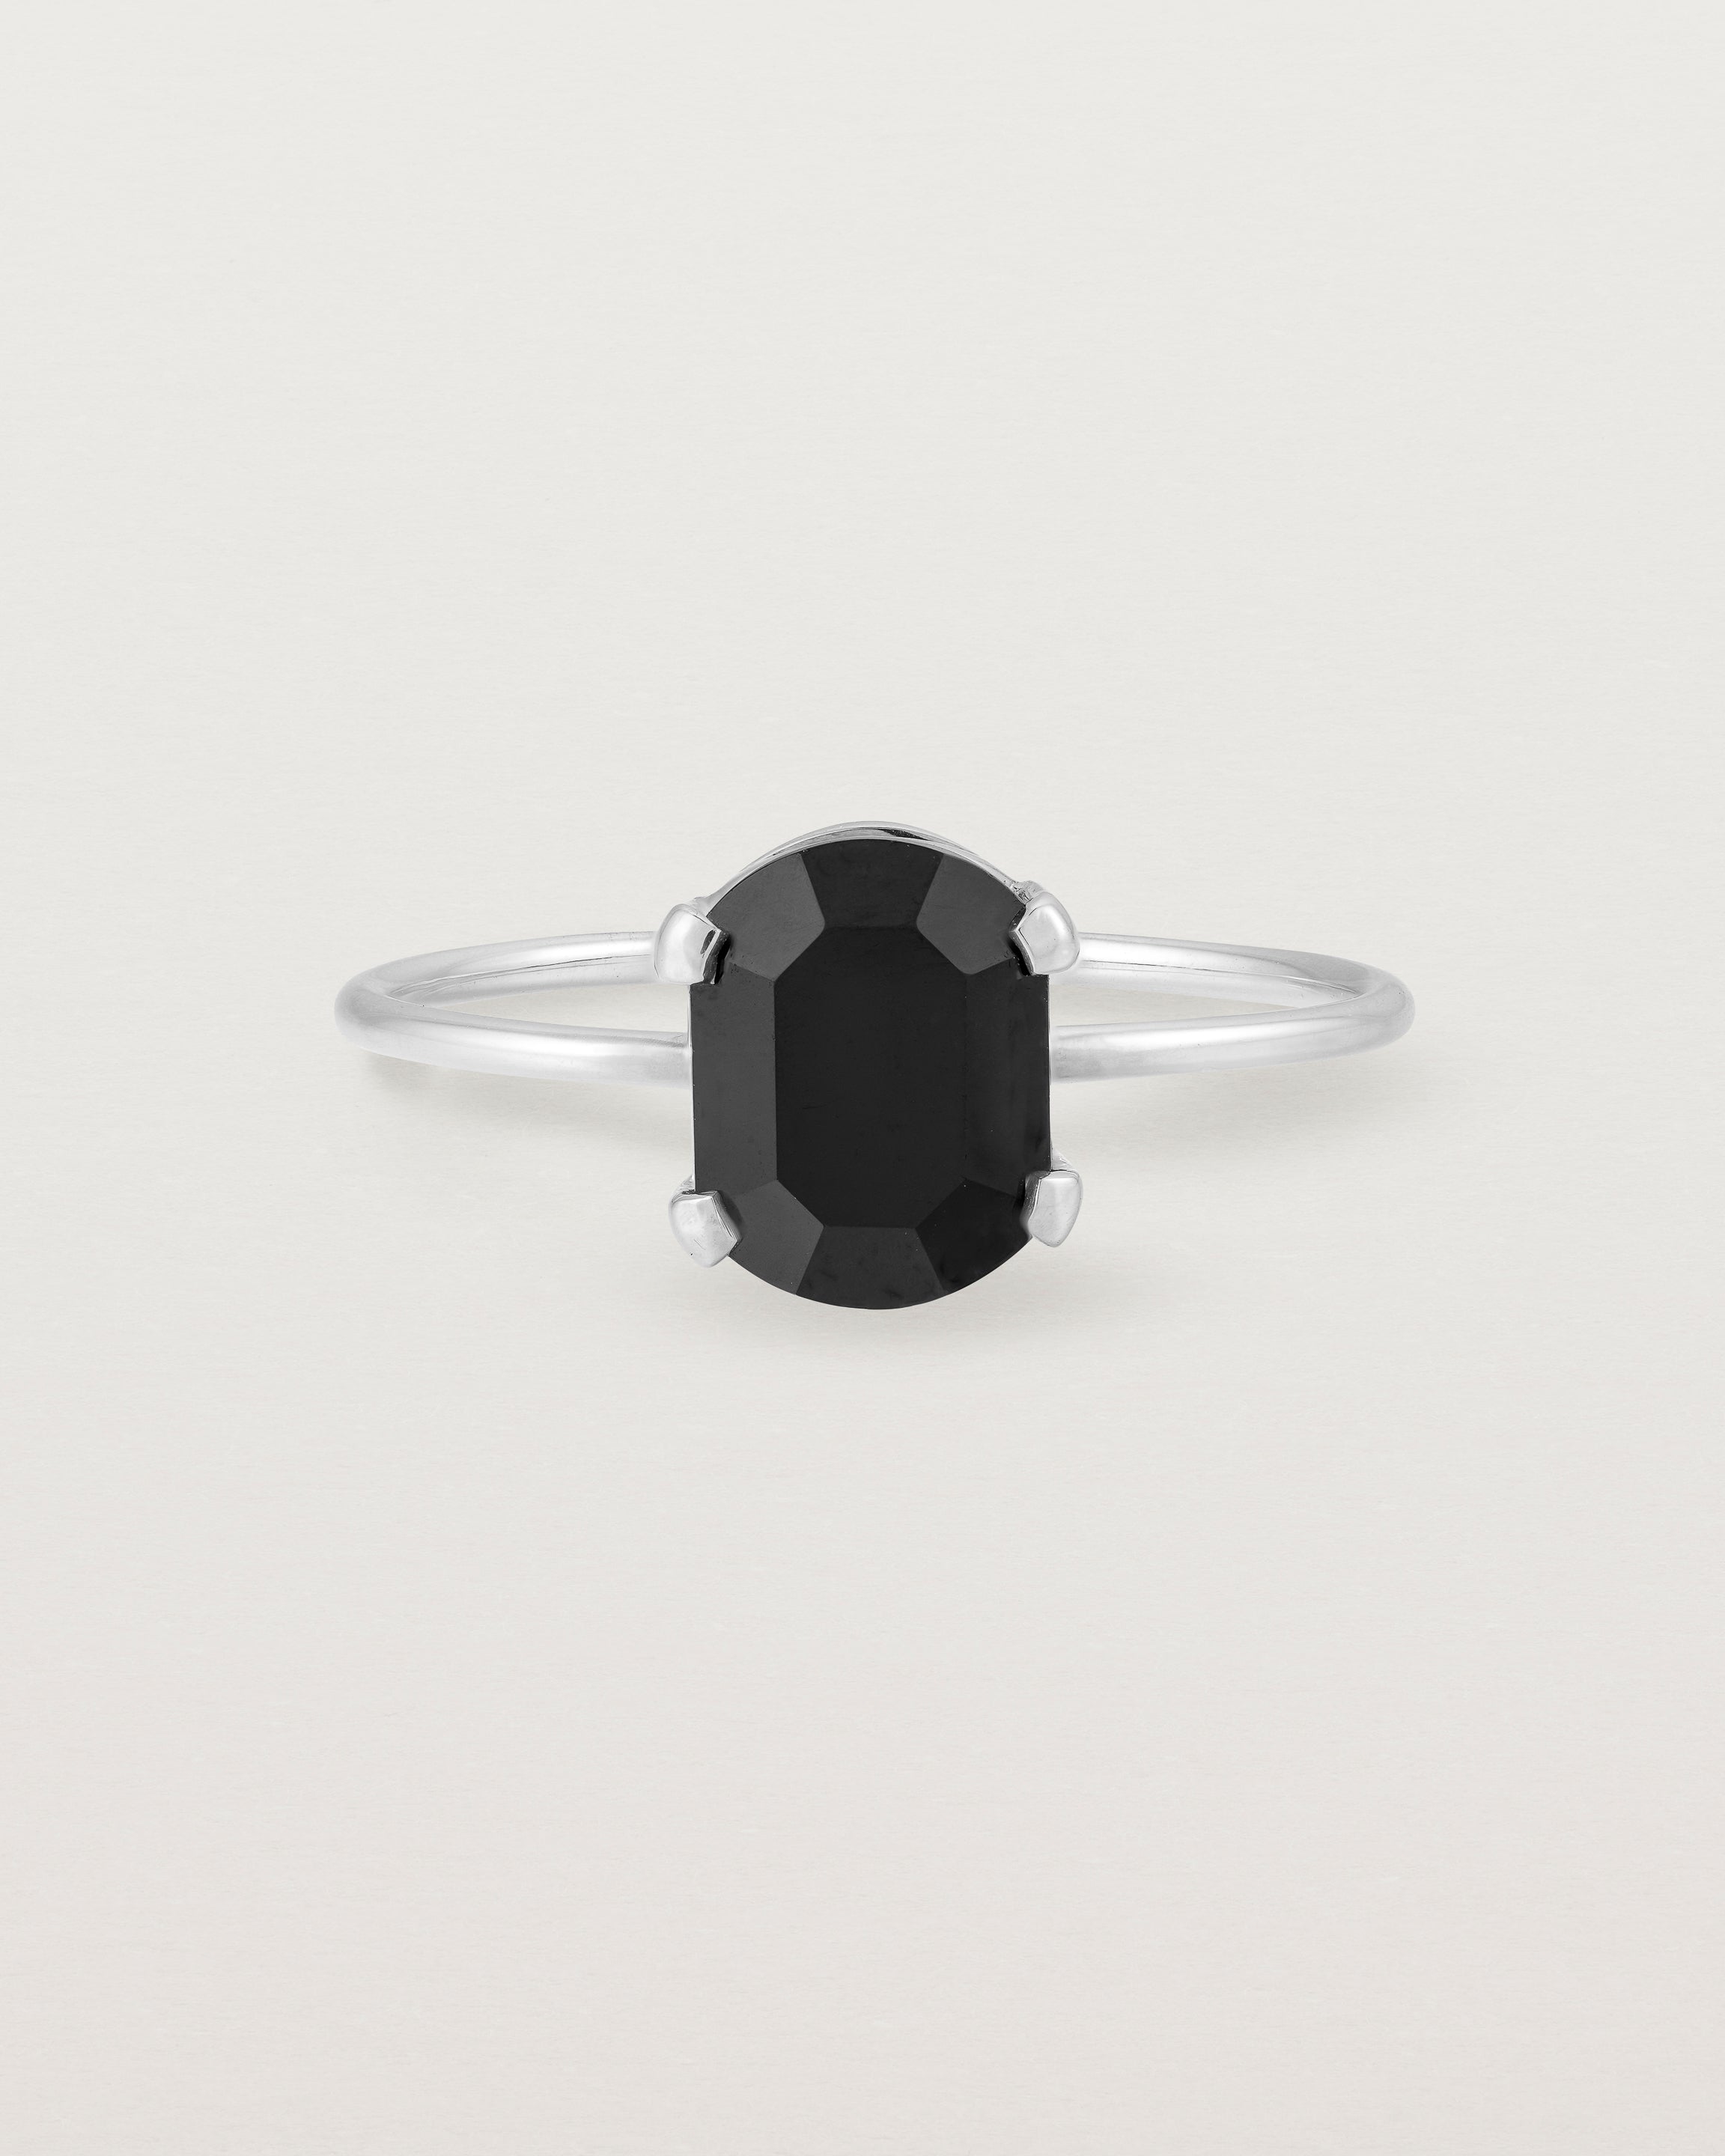 Front view of the Fei Ring | Black Spinel in Sterling Silver.